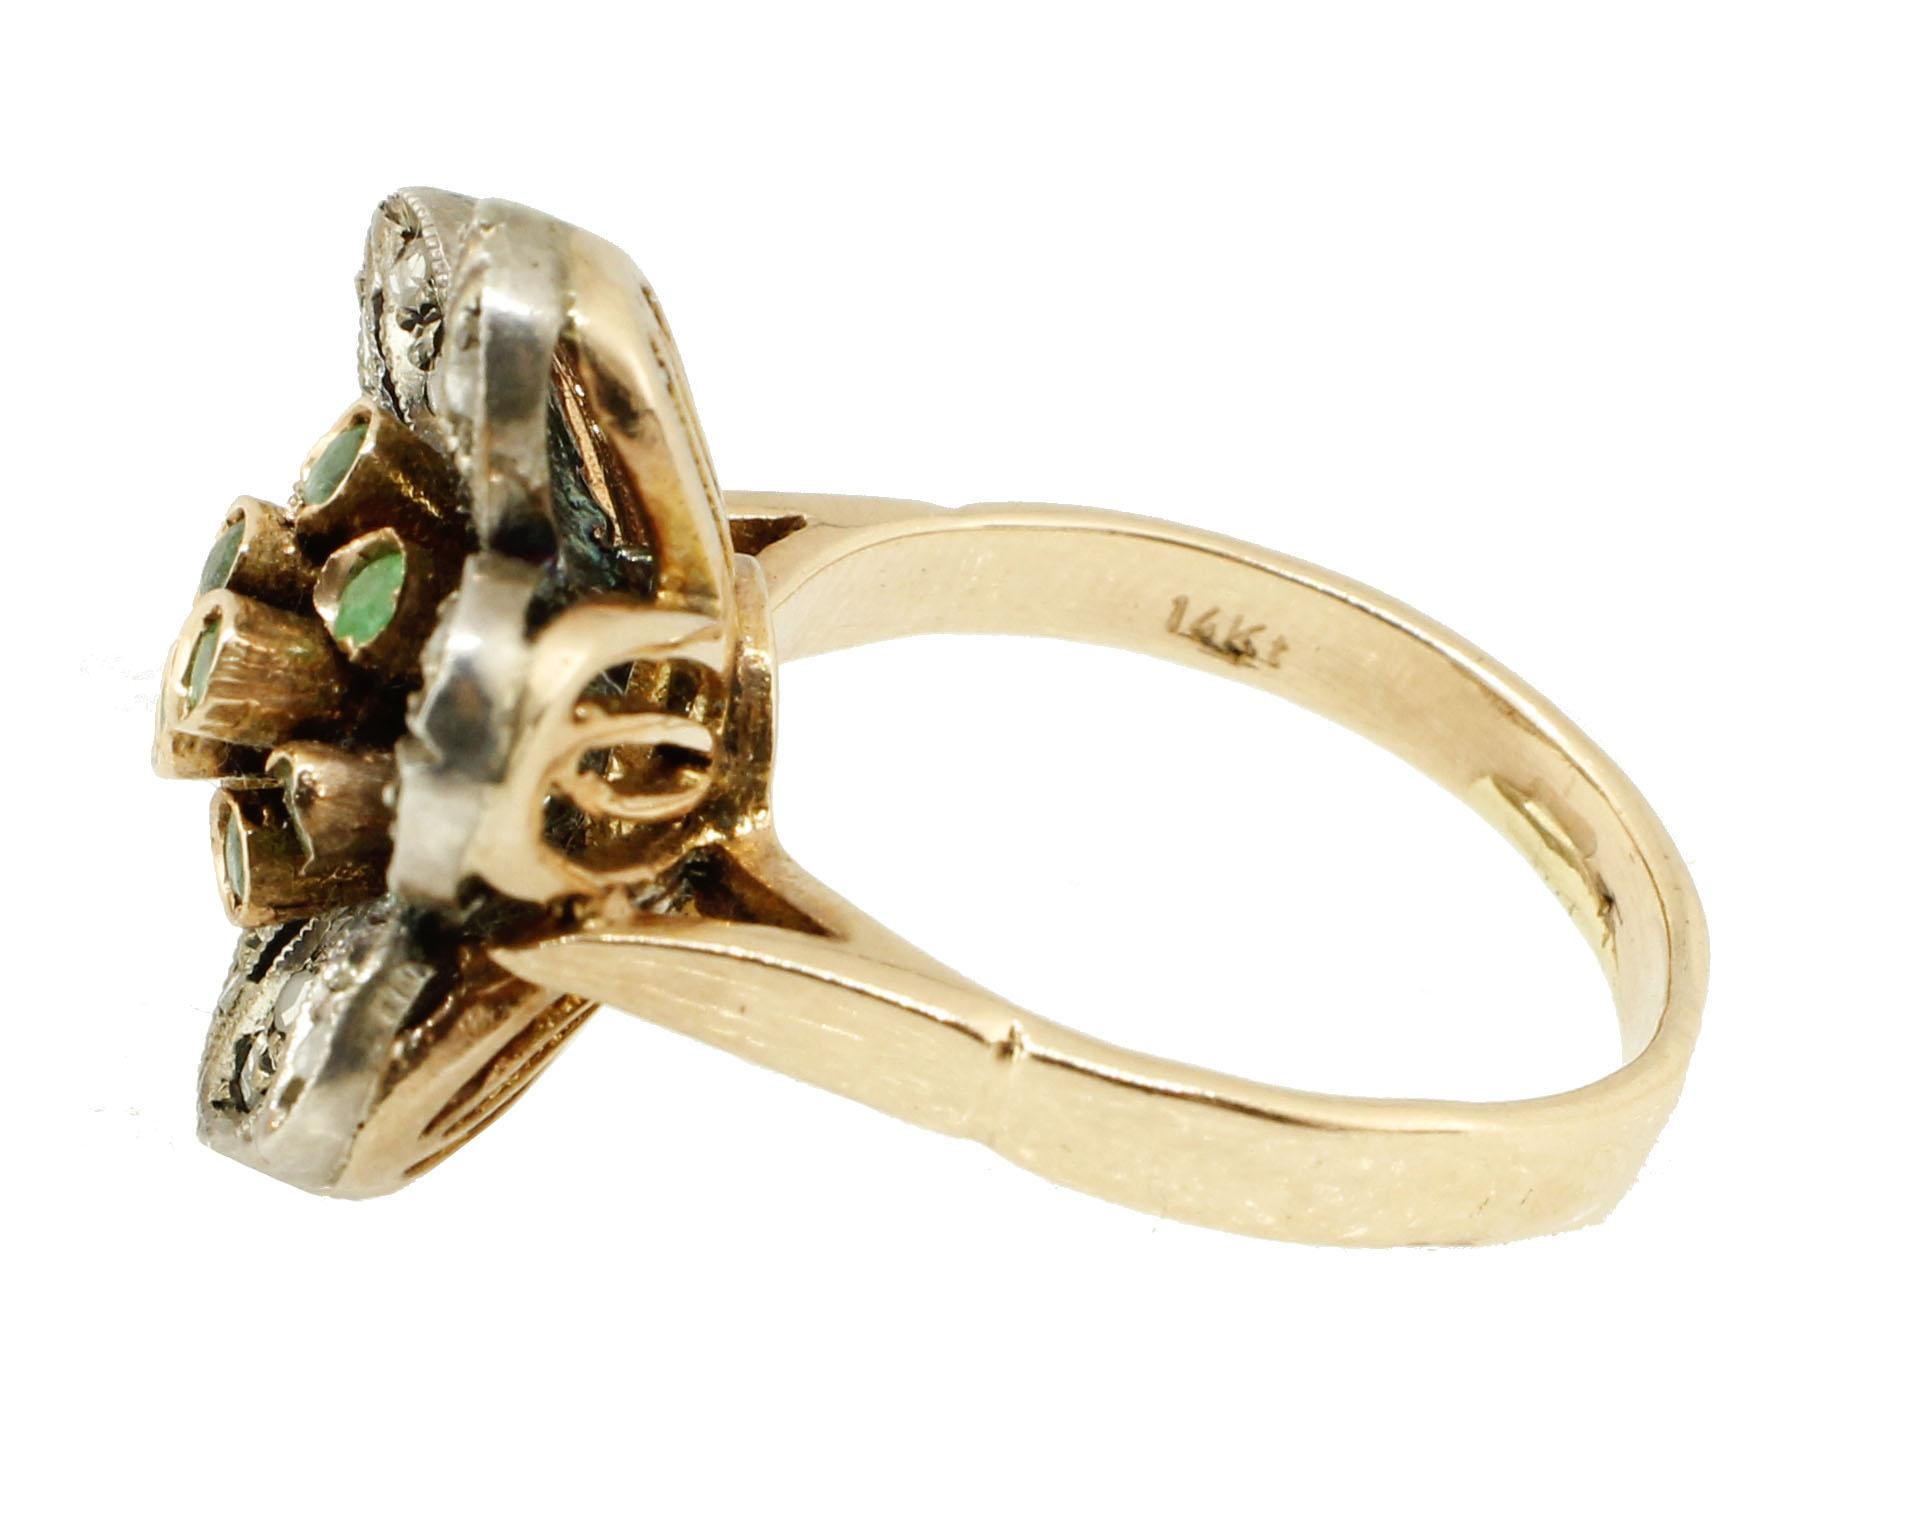 Retro flower shaped ring in 14kt yellow gold and silver composed of petals covered in diamonds that surround the central emeralds.

diamonds 0.26kt
tot weight 8.4gr
r.f.  heu

We hereby inform our customers that in the case of return they will not